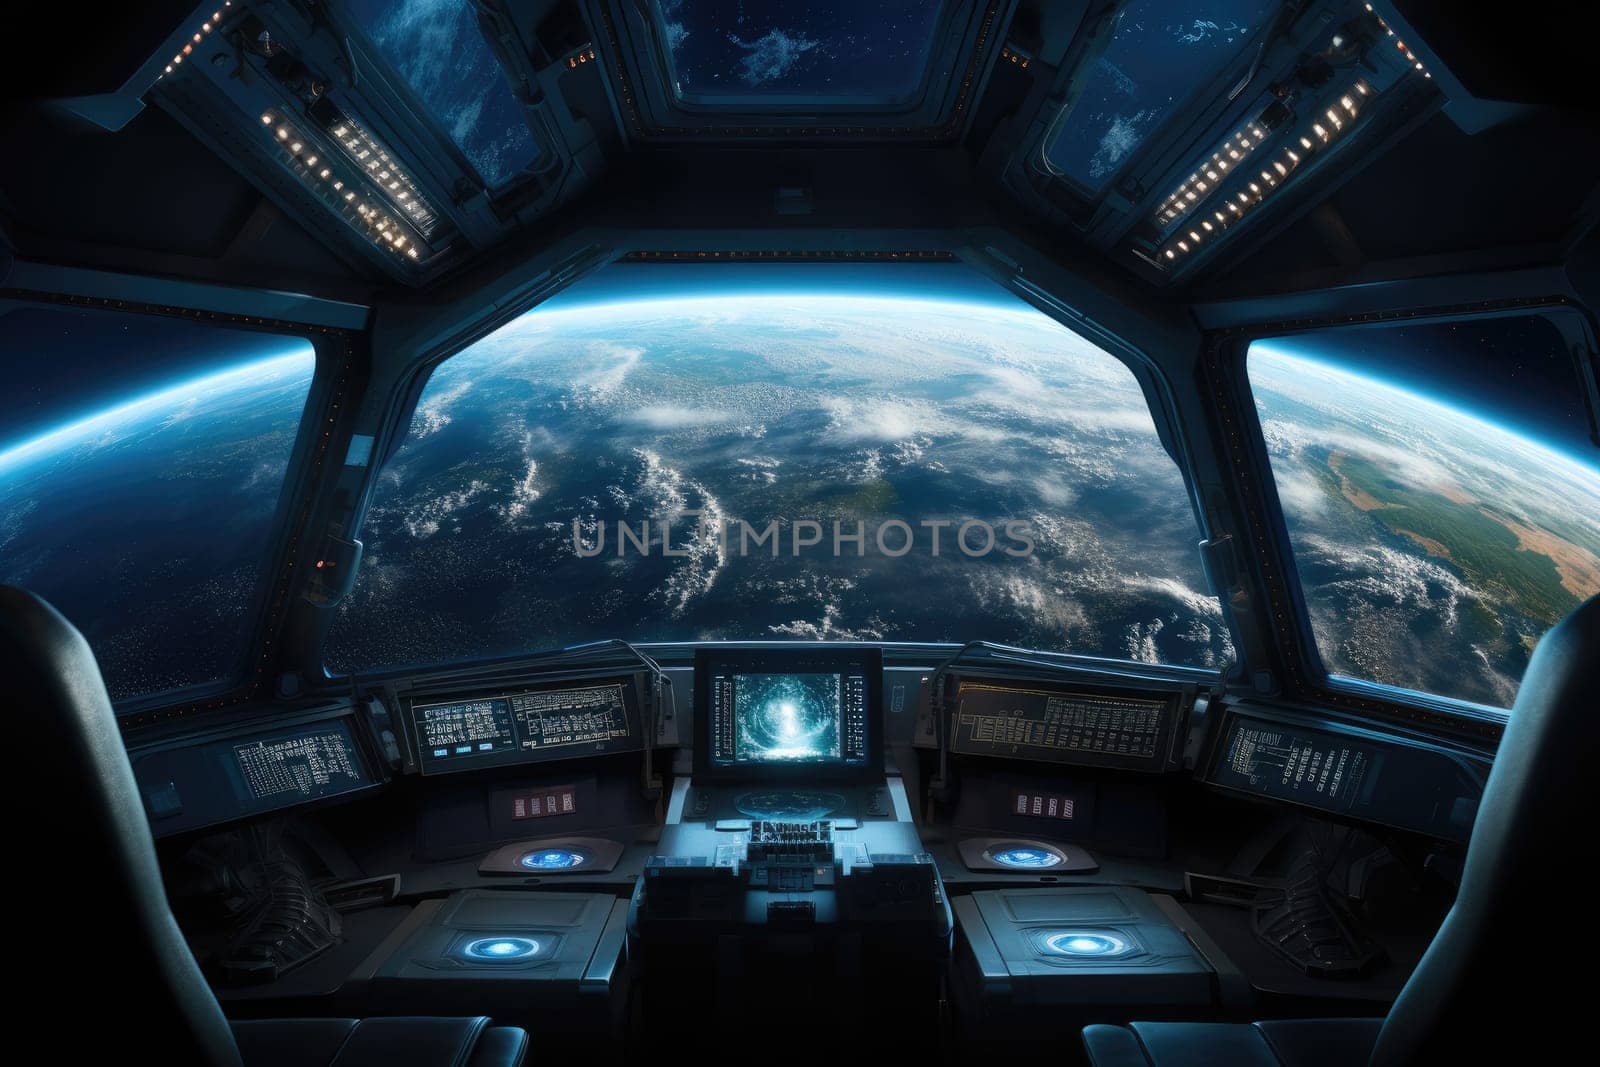 Behold the remarkable sight of our home planet seen through the window of a spaceship, featuring the captivating blend of azure oceans, ethereal clouds, and varied terrains.